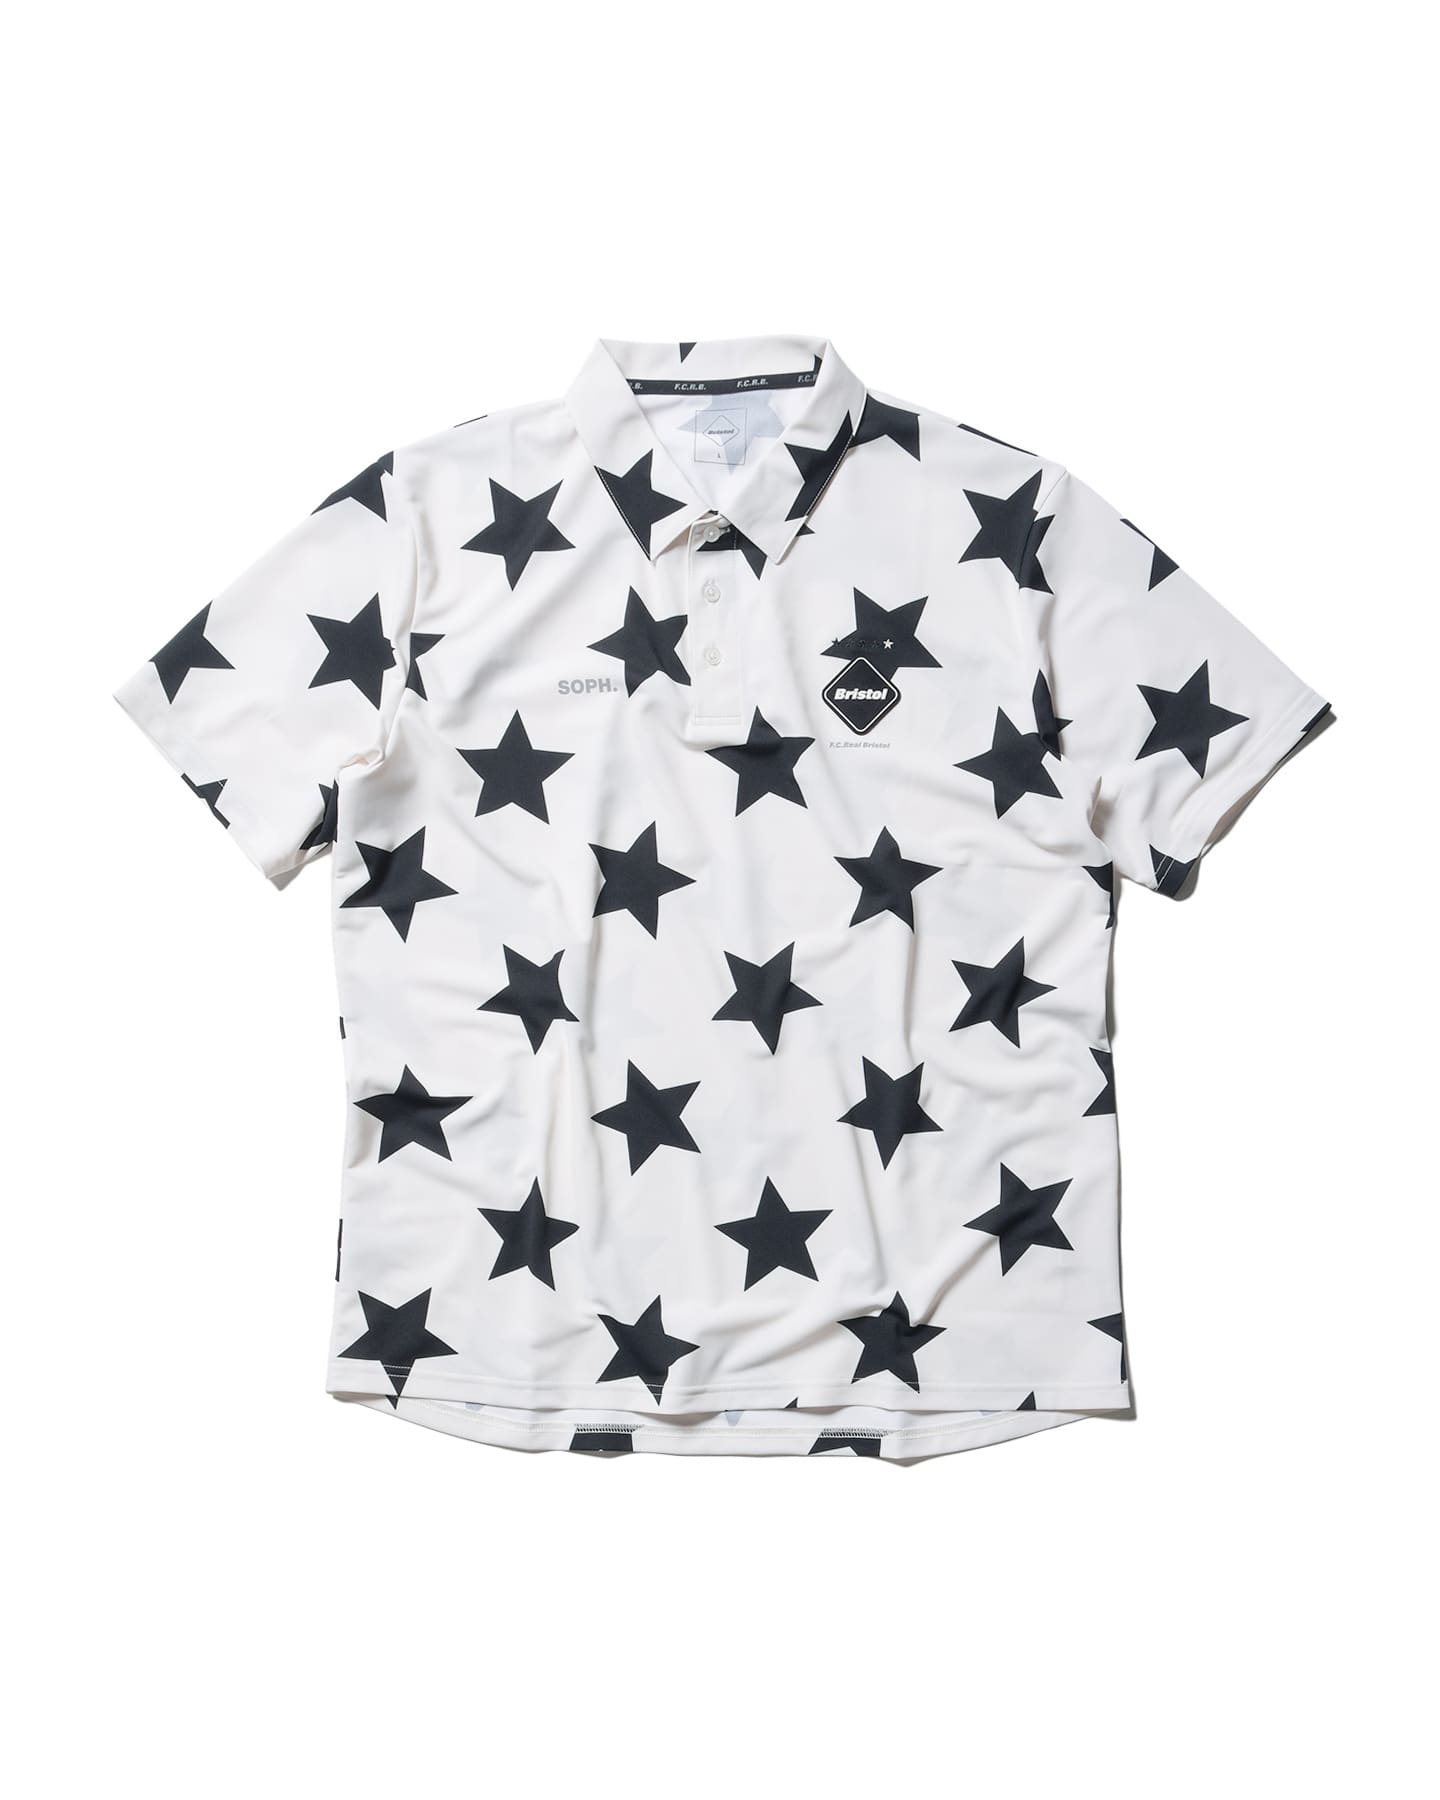 SOPH. | WHOLE PATTERN S/S POLO(M OFF WHITE (STAR)):